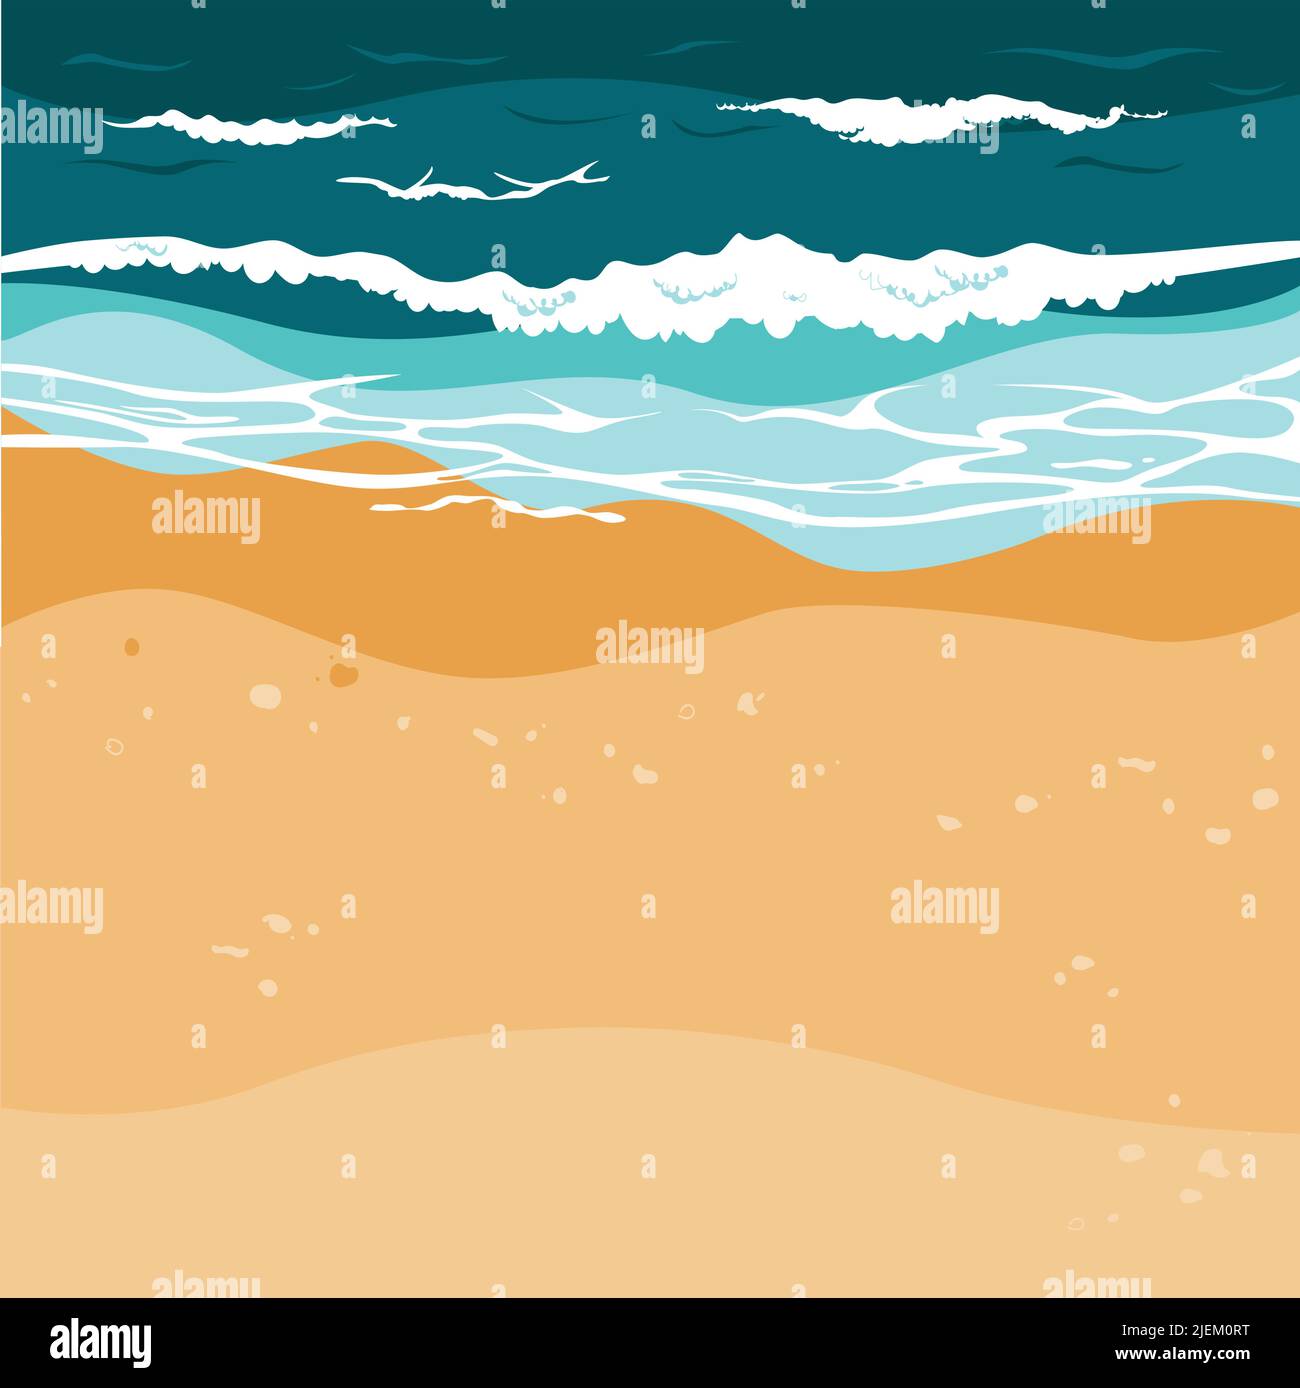 High angle view of summer beach landscape with sea waves and sand. Foamy waves runs over the sandy shore top view. Square shape Hand drawn background Stock Vector